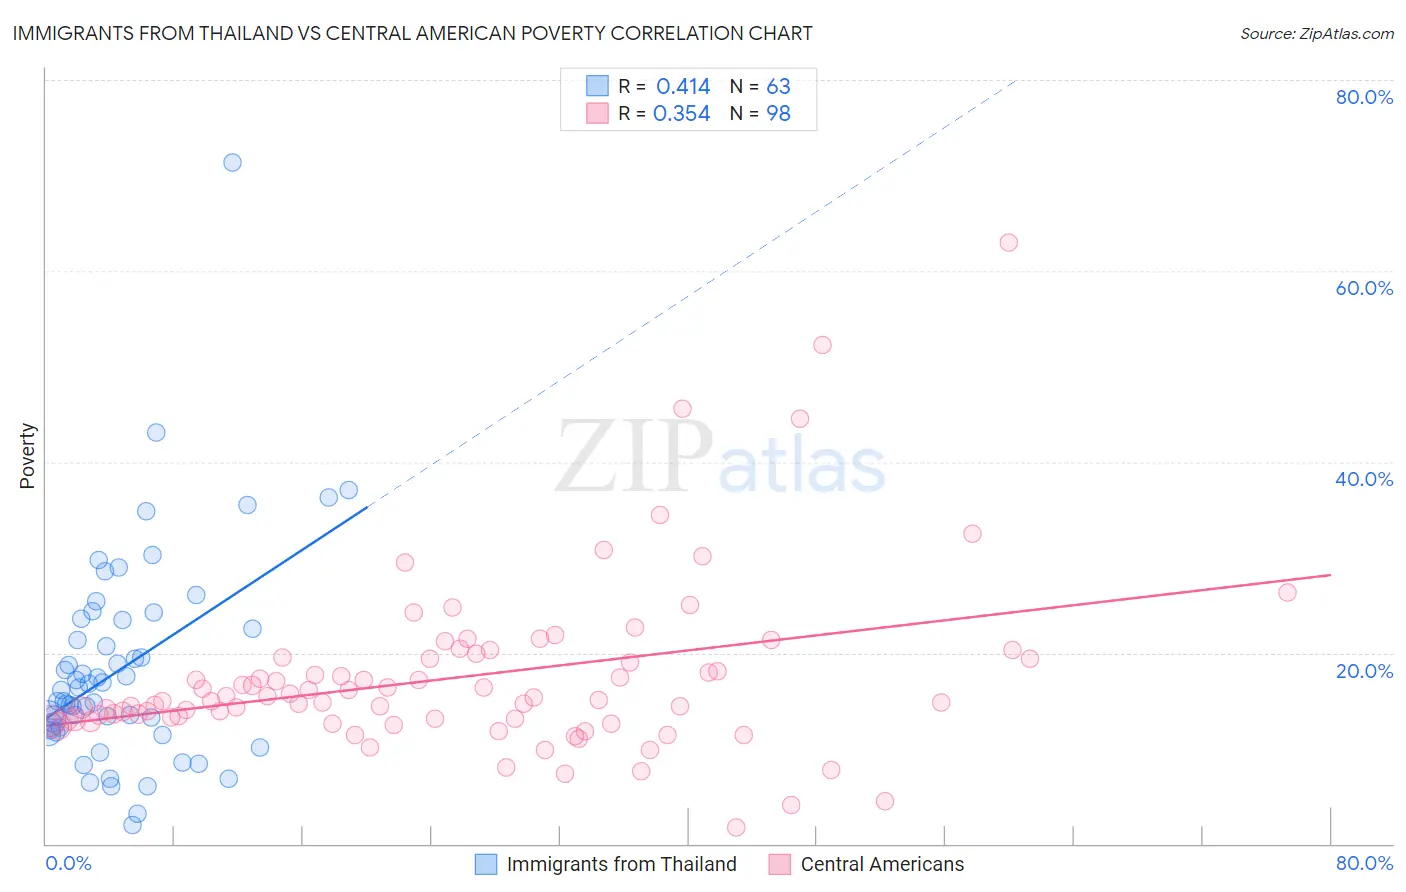 Immigrants from Thailand vs Central American Poverty